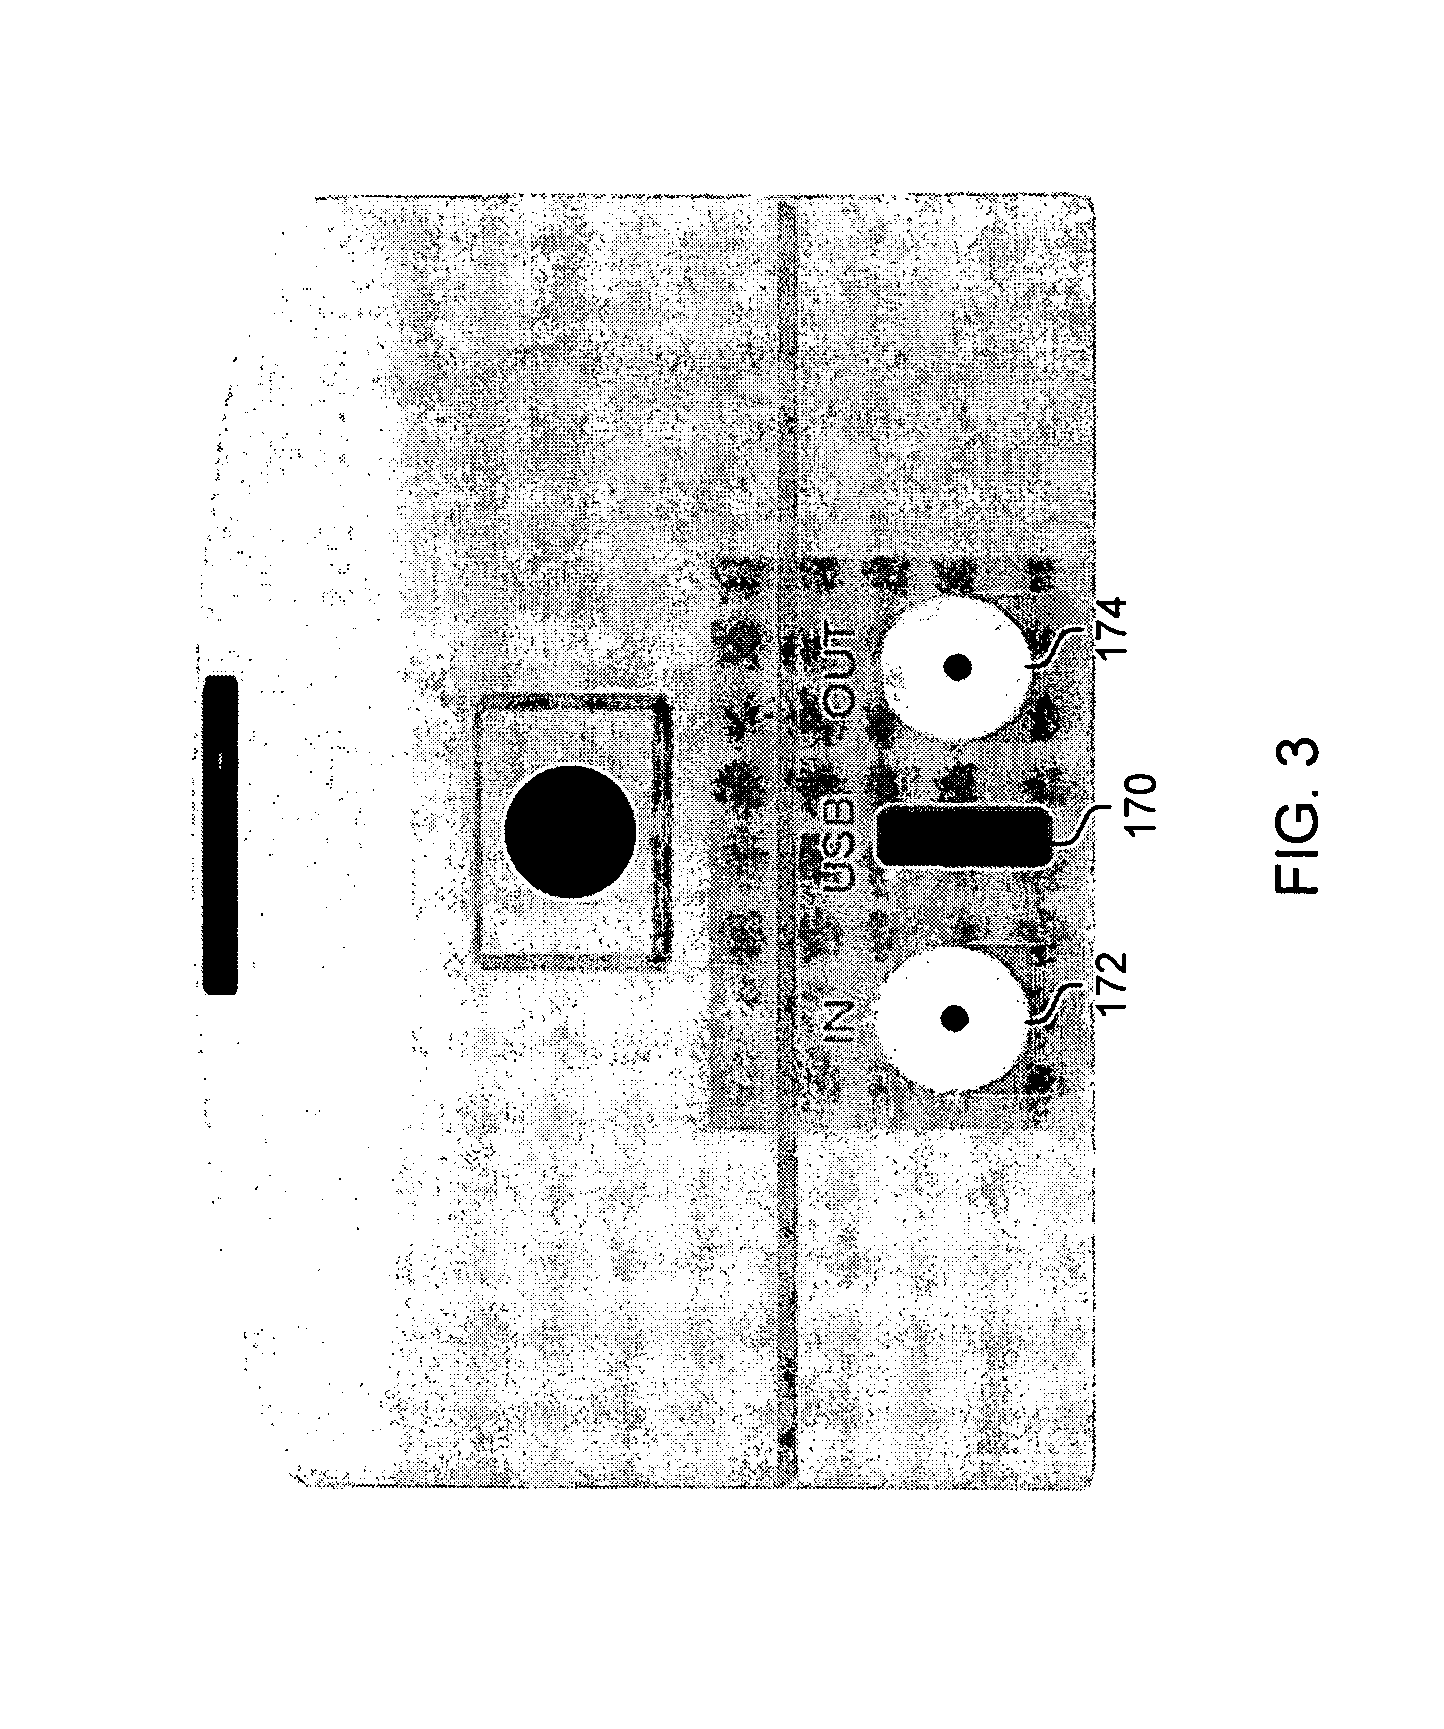 Automatic sensing power systems and methods